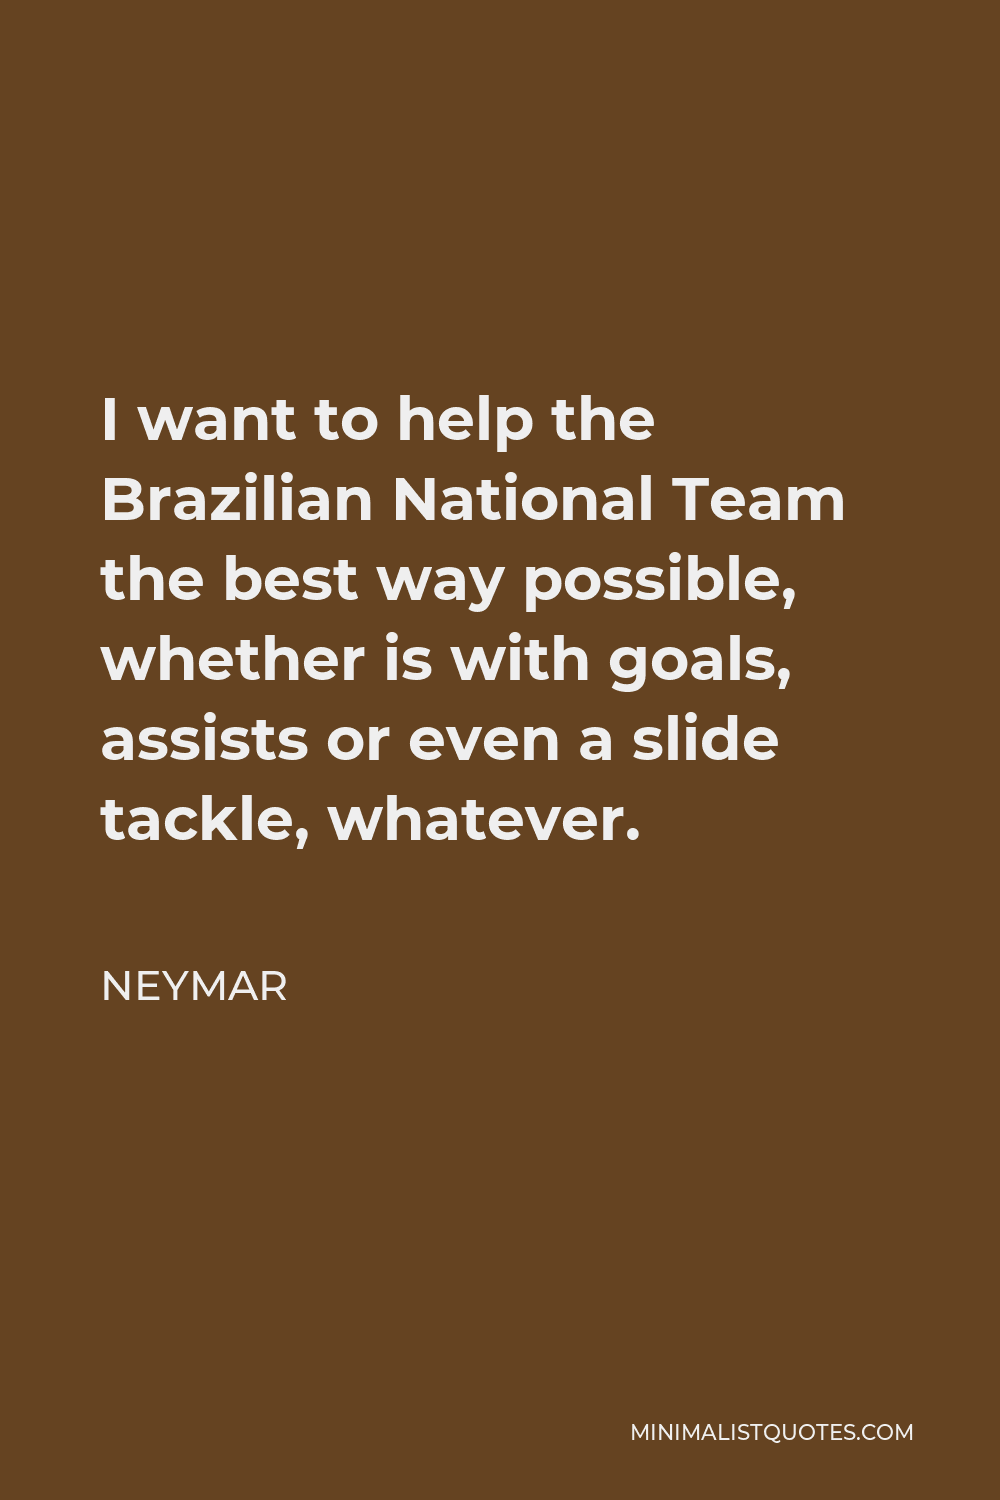 Neymar Quote - I want to help the Brazilian National Team the best way possible, whether is with goals, assists or even a slide tackle, whatever.